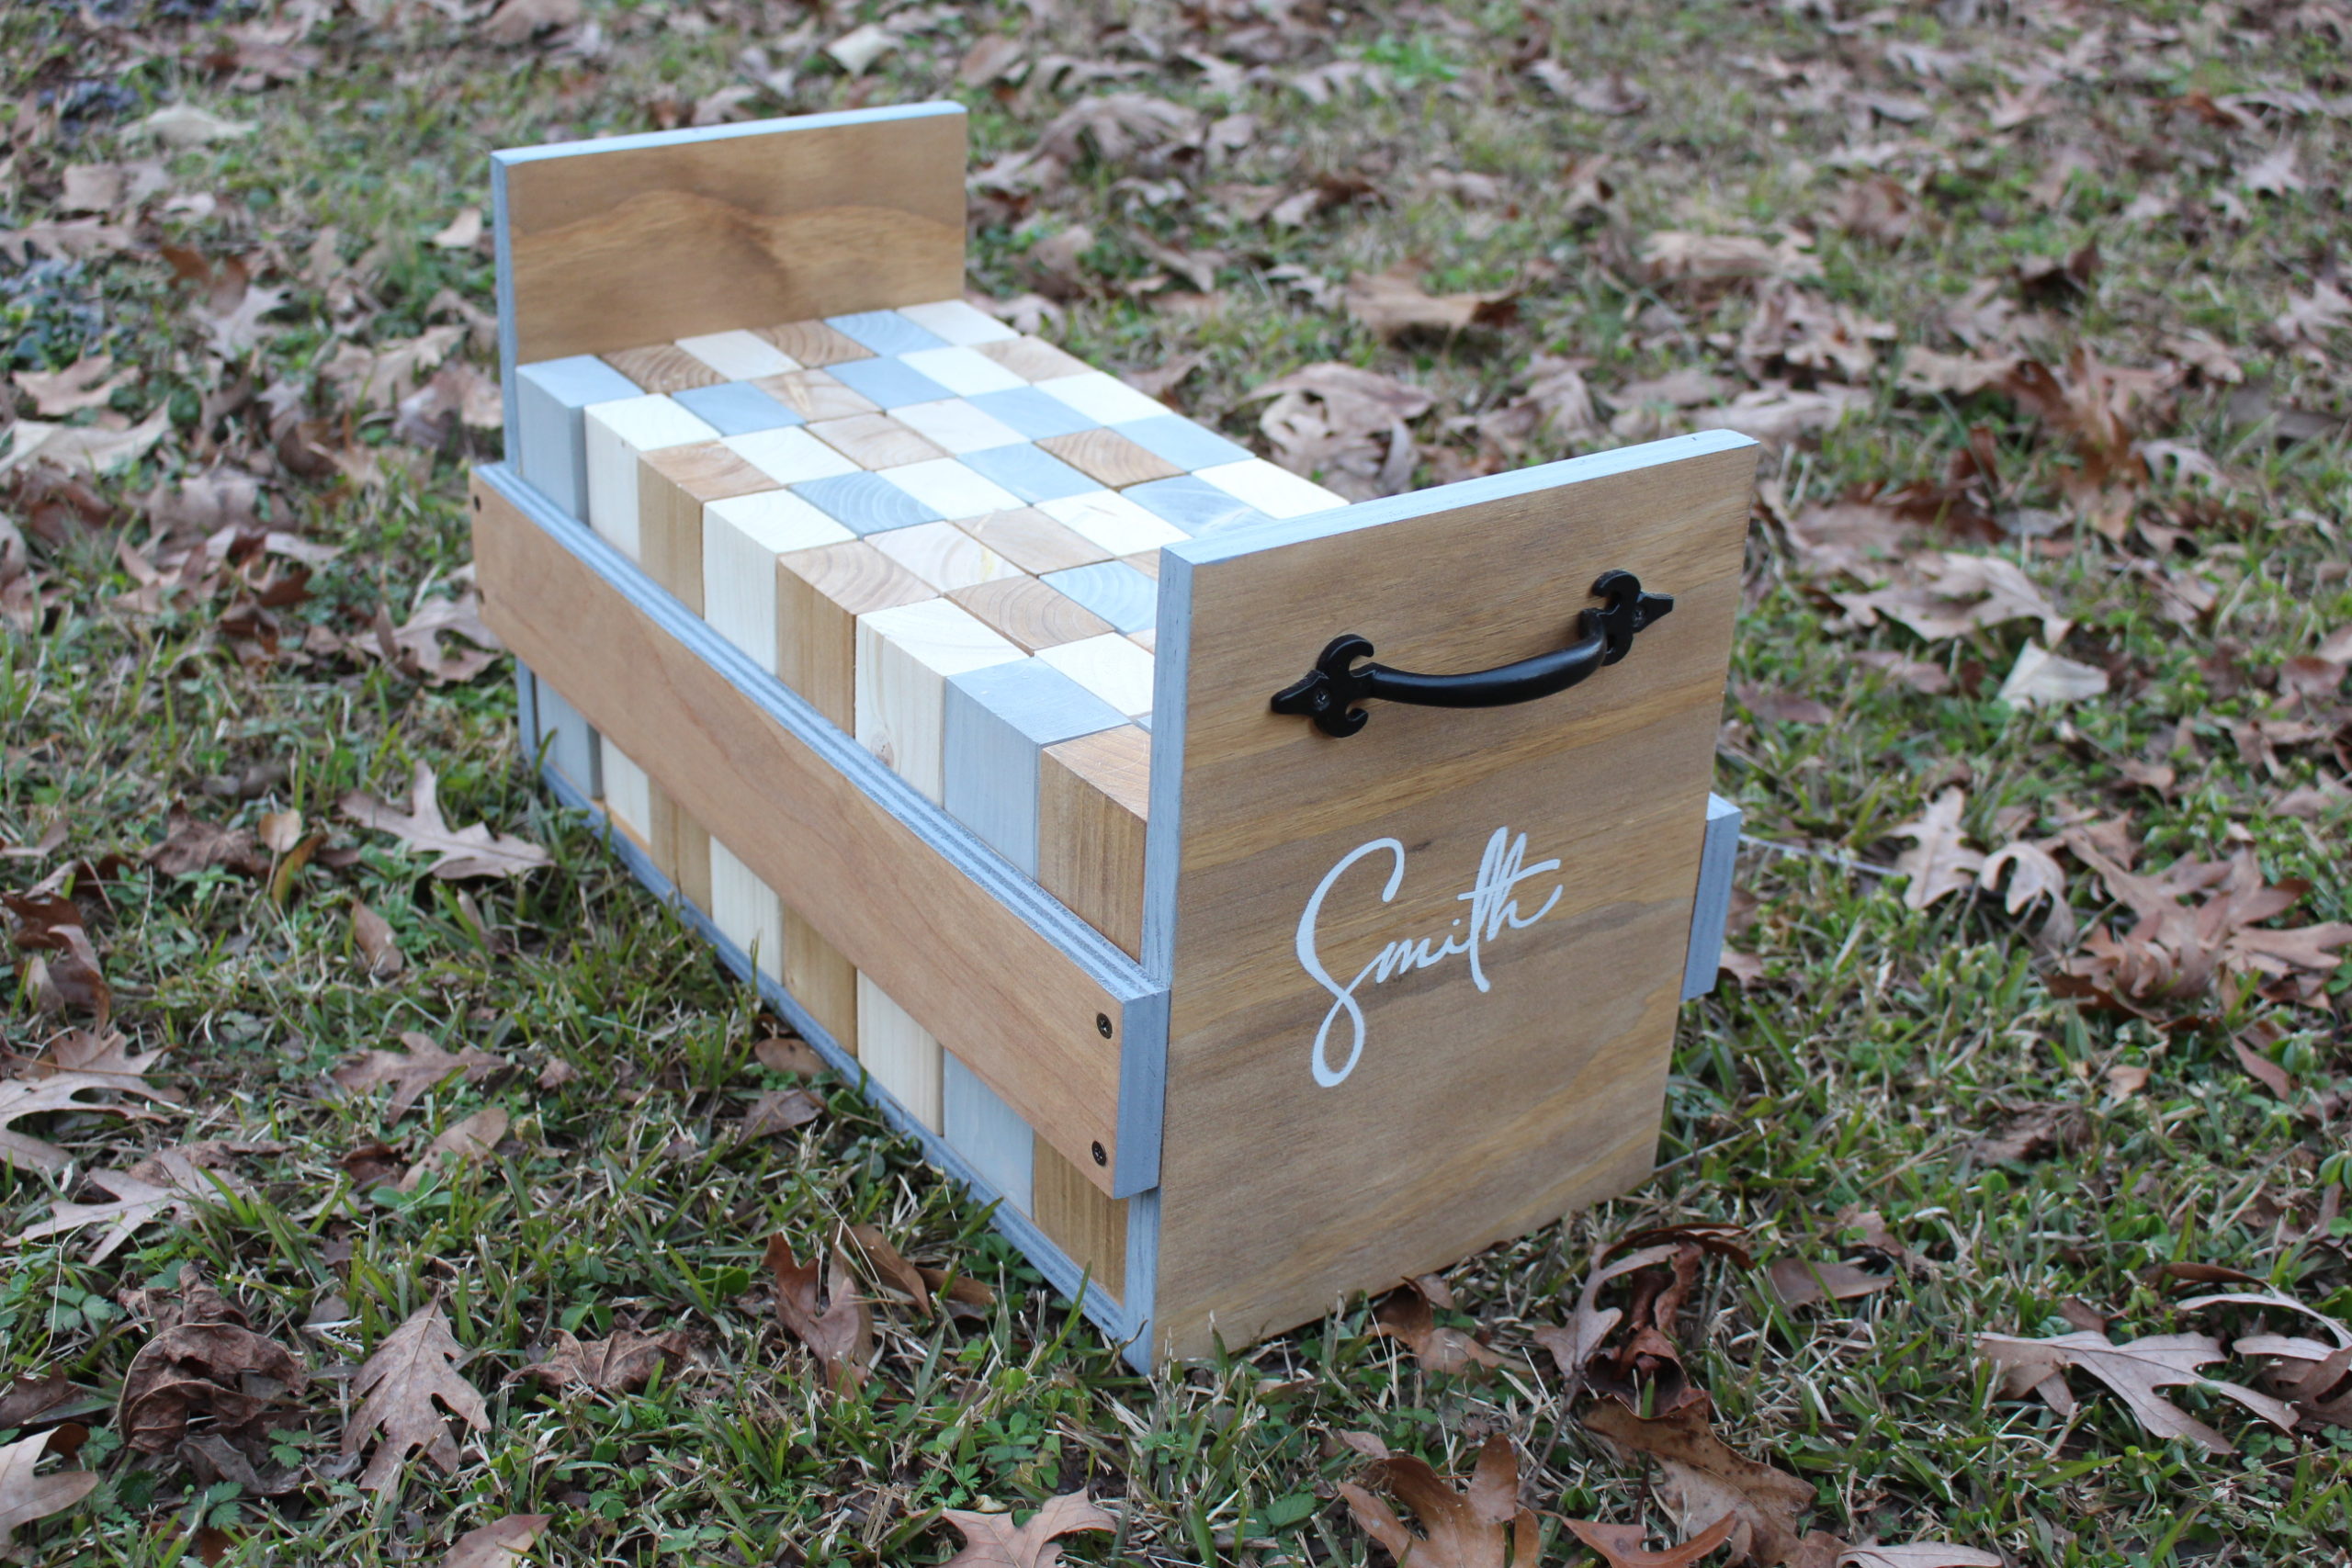 How to Make a Giant Jenga-Like Yard Game With Carrying Case